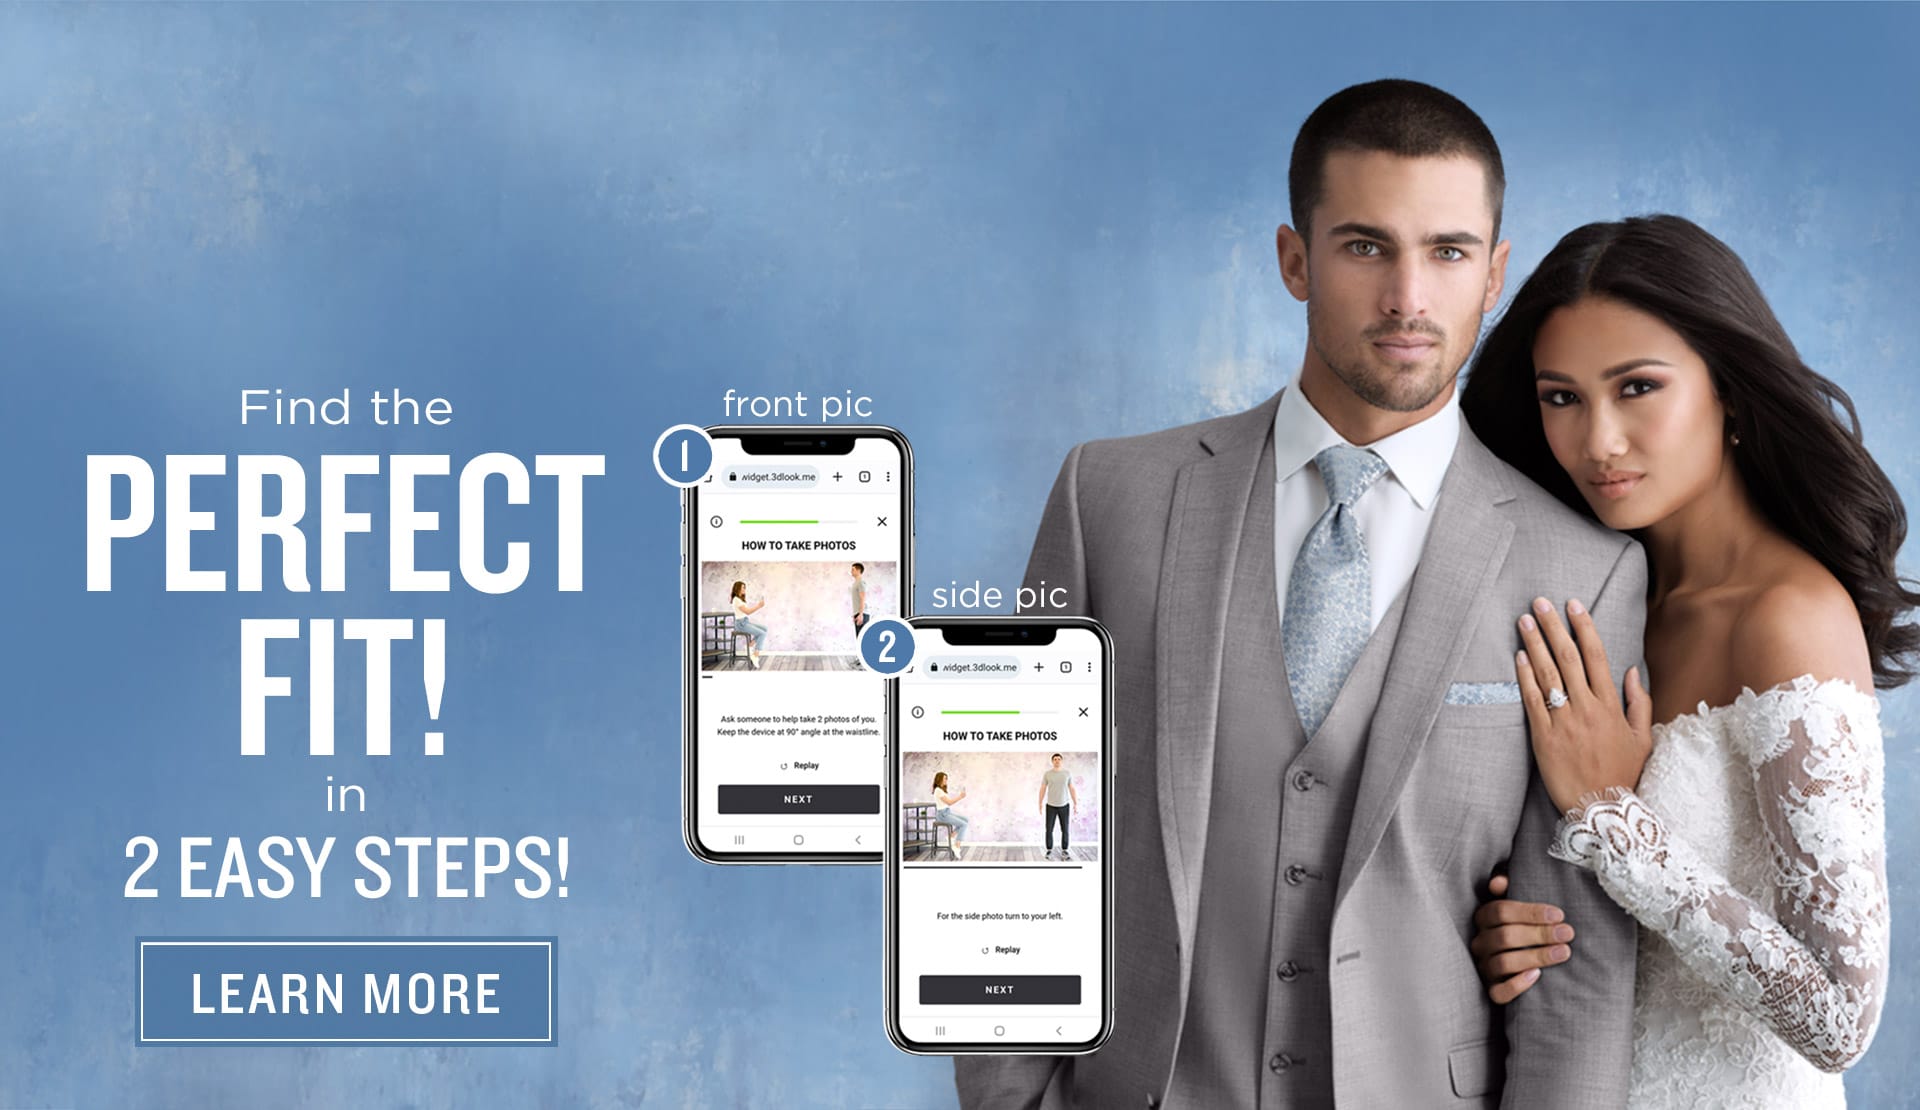 Find the perfect fit for your tuxedo or suit by using our digital measurement tool with 2 easy steps.